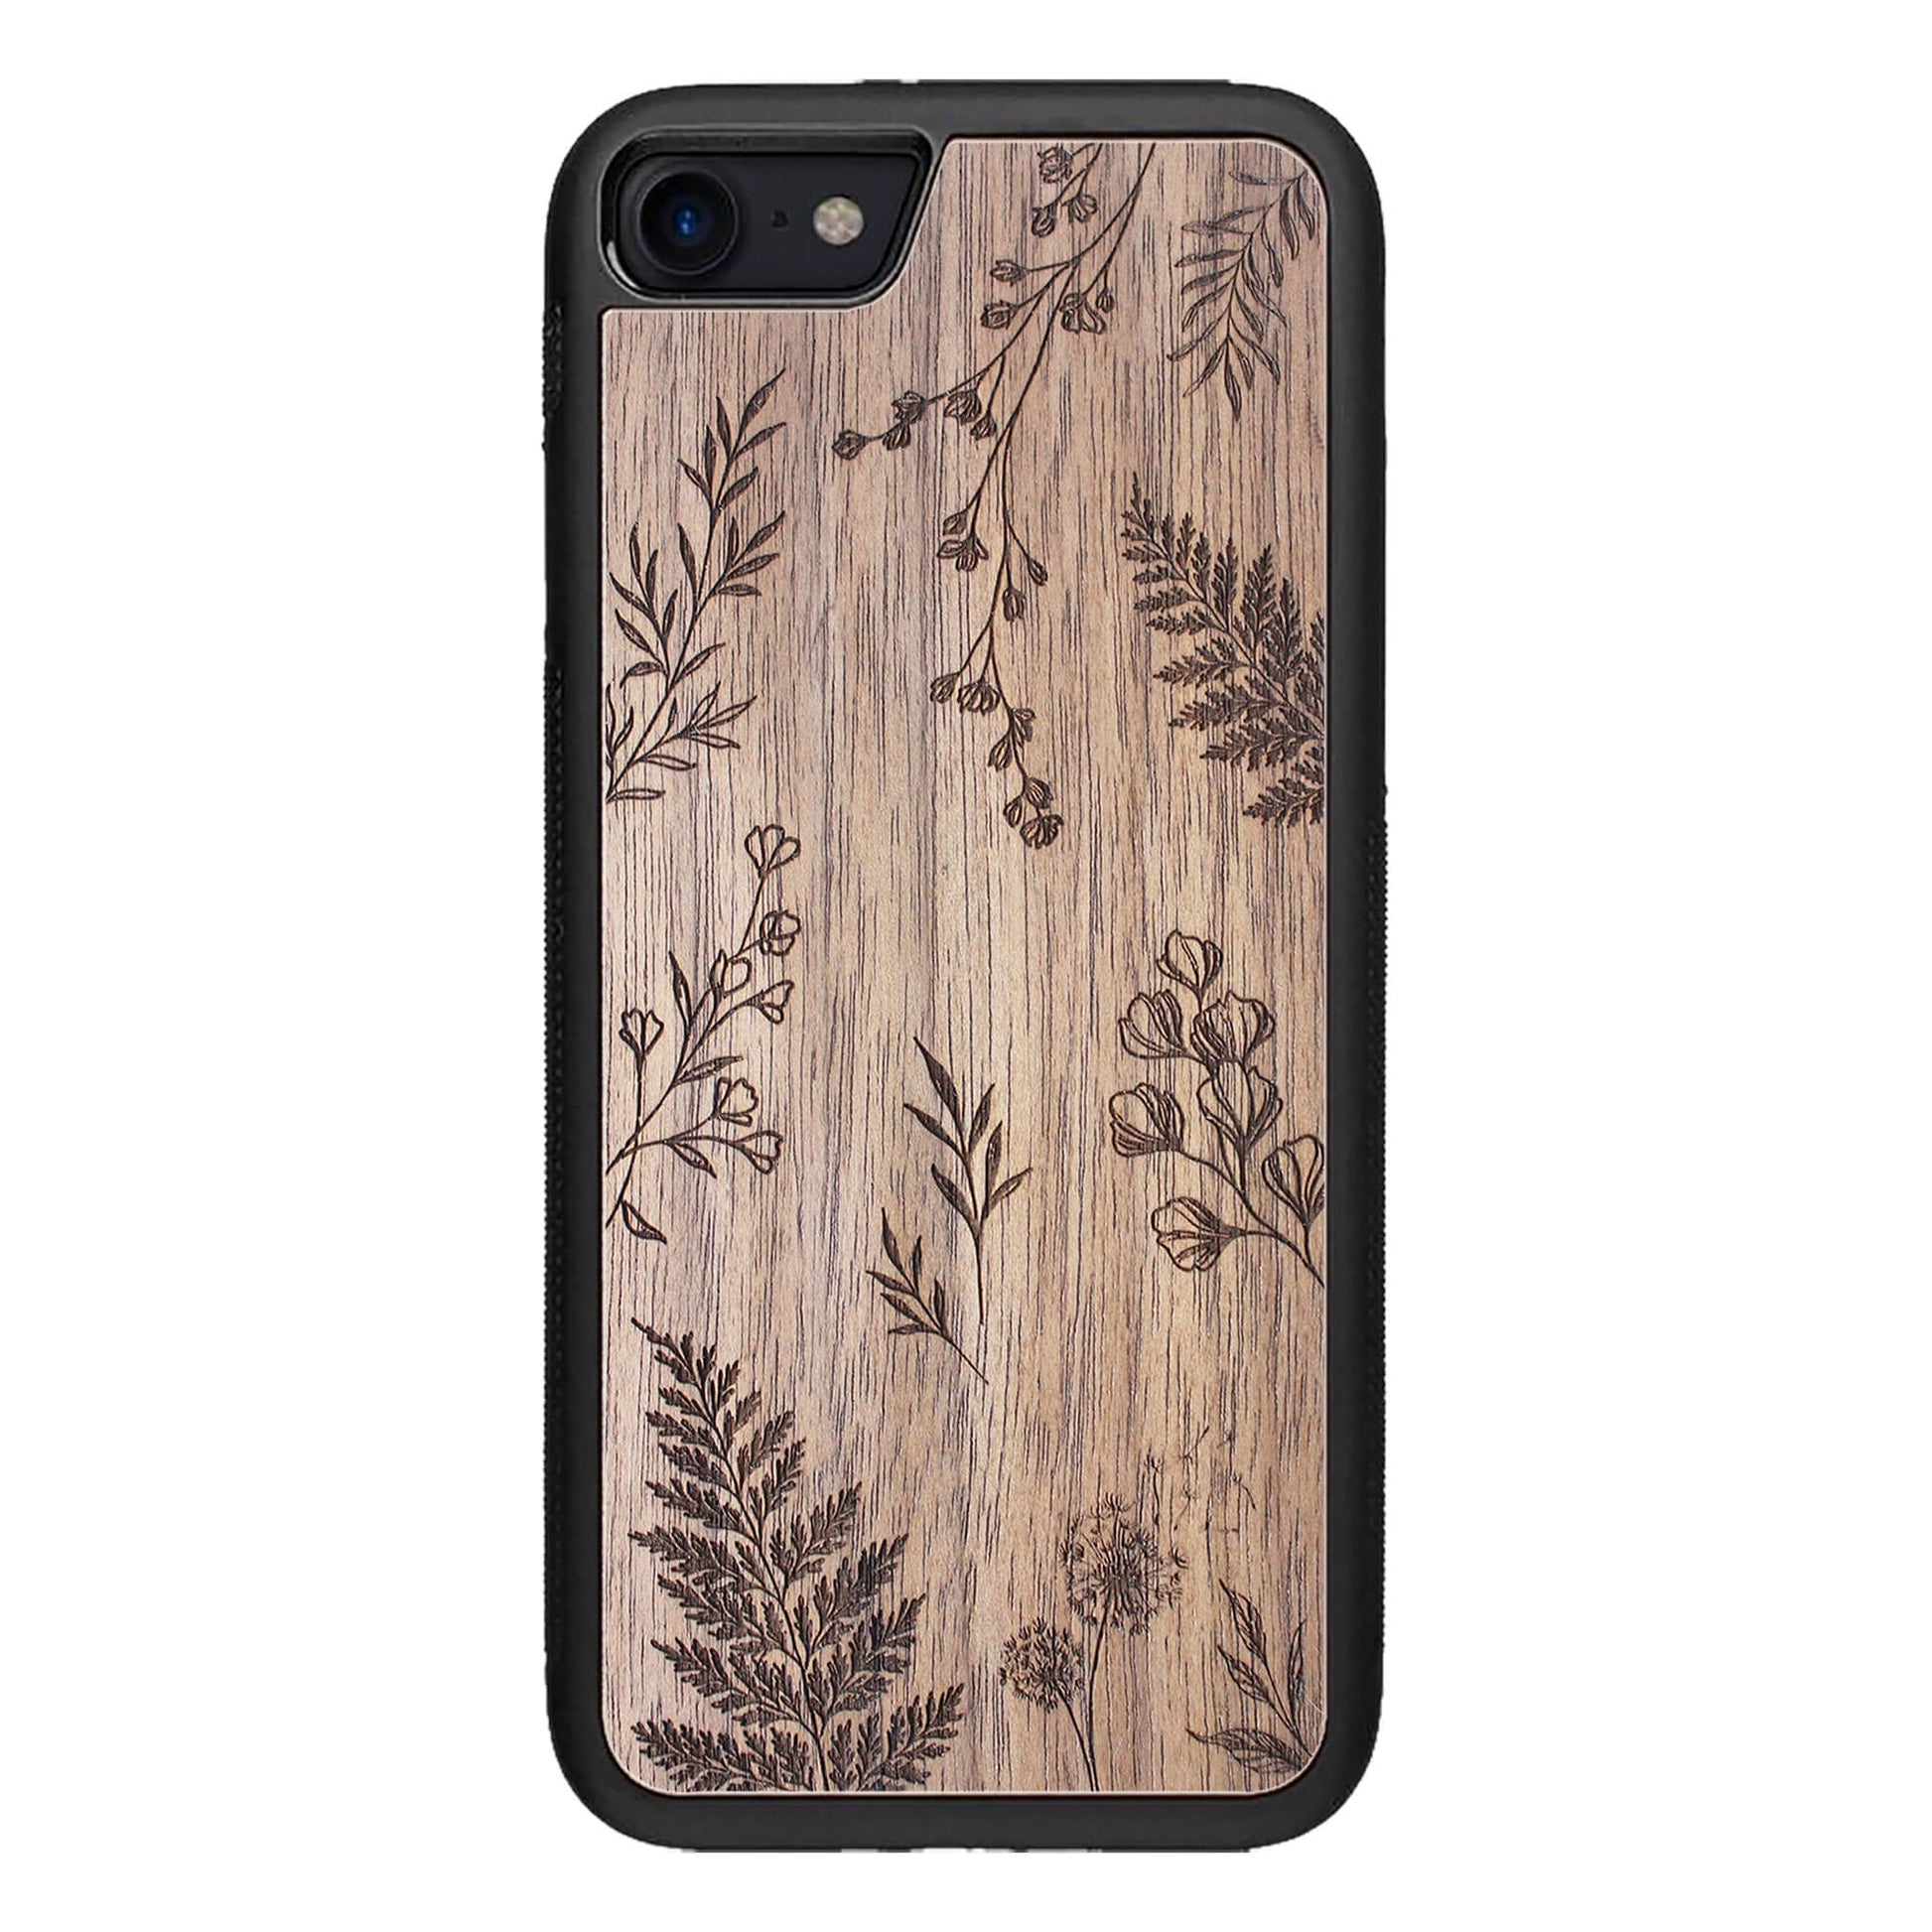 Wooden Case for iPhone 7 Botanical